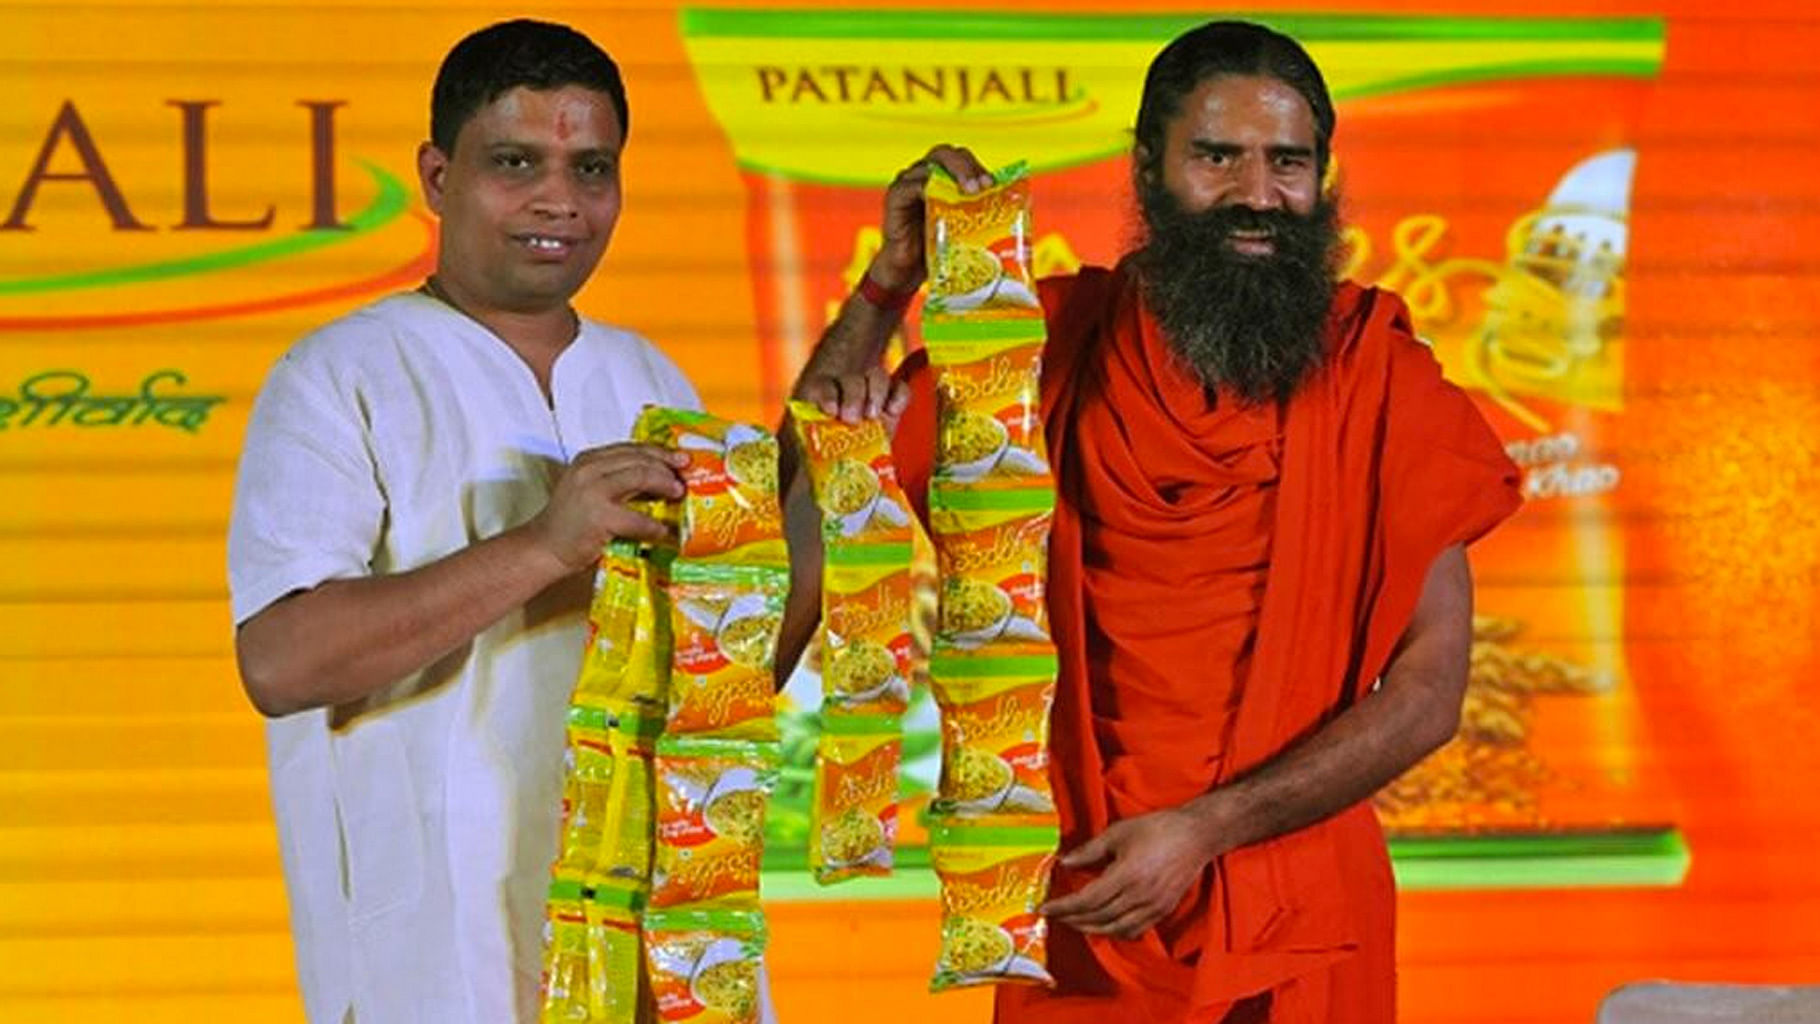 Patanjali Ayurved’s CEO with Baba Ramdev. (Photo Courtesy: Twitter/<a href="https://twitter.com/just2_read/status/775637245579714560">@Just_2Read</a>)